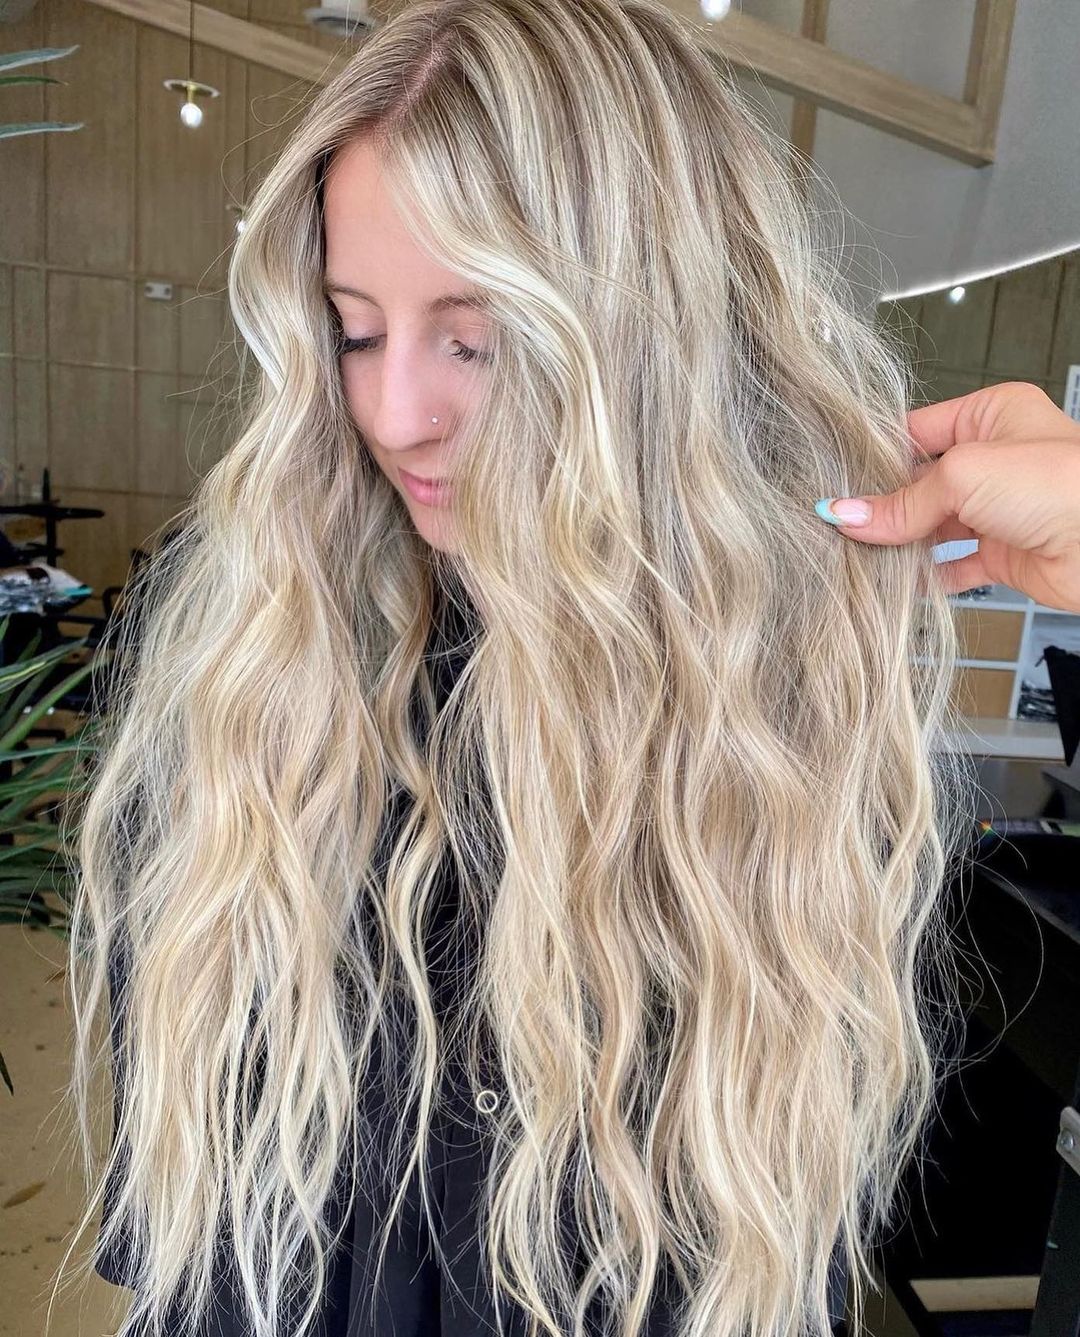 50 Awesome Long Layered Hair Ideas For 2021 images 11